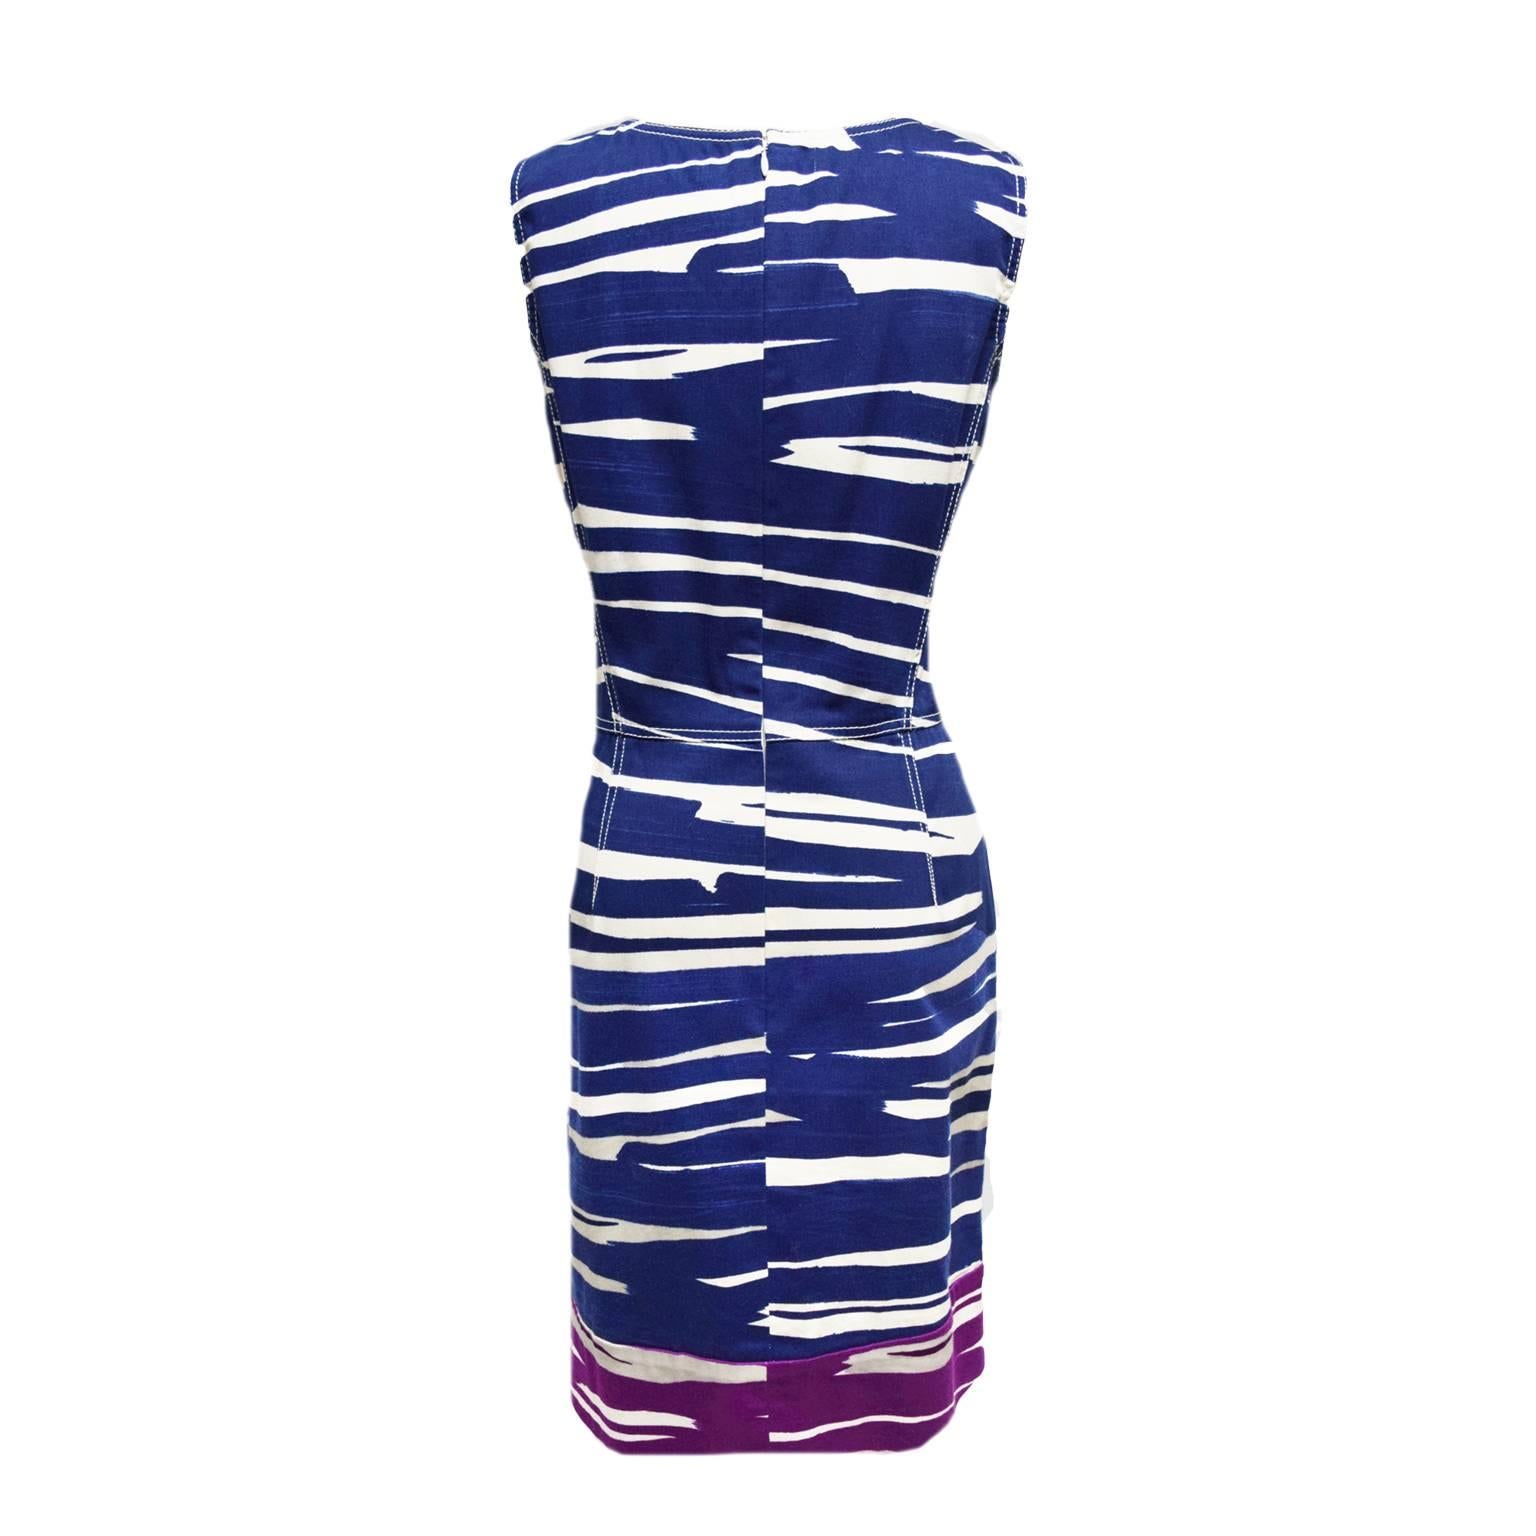 This dress by Oscar de la Renta is made of 100% cotton. The dresses print is an animal like striped print and is color blocked in blue and purple. The dress has an empire waist and a back zipped closure. 